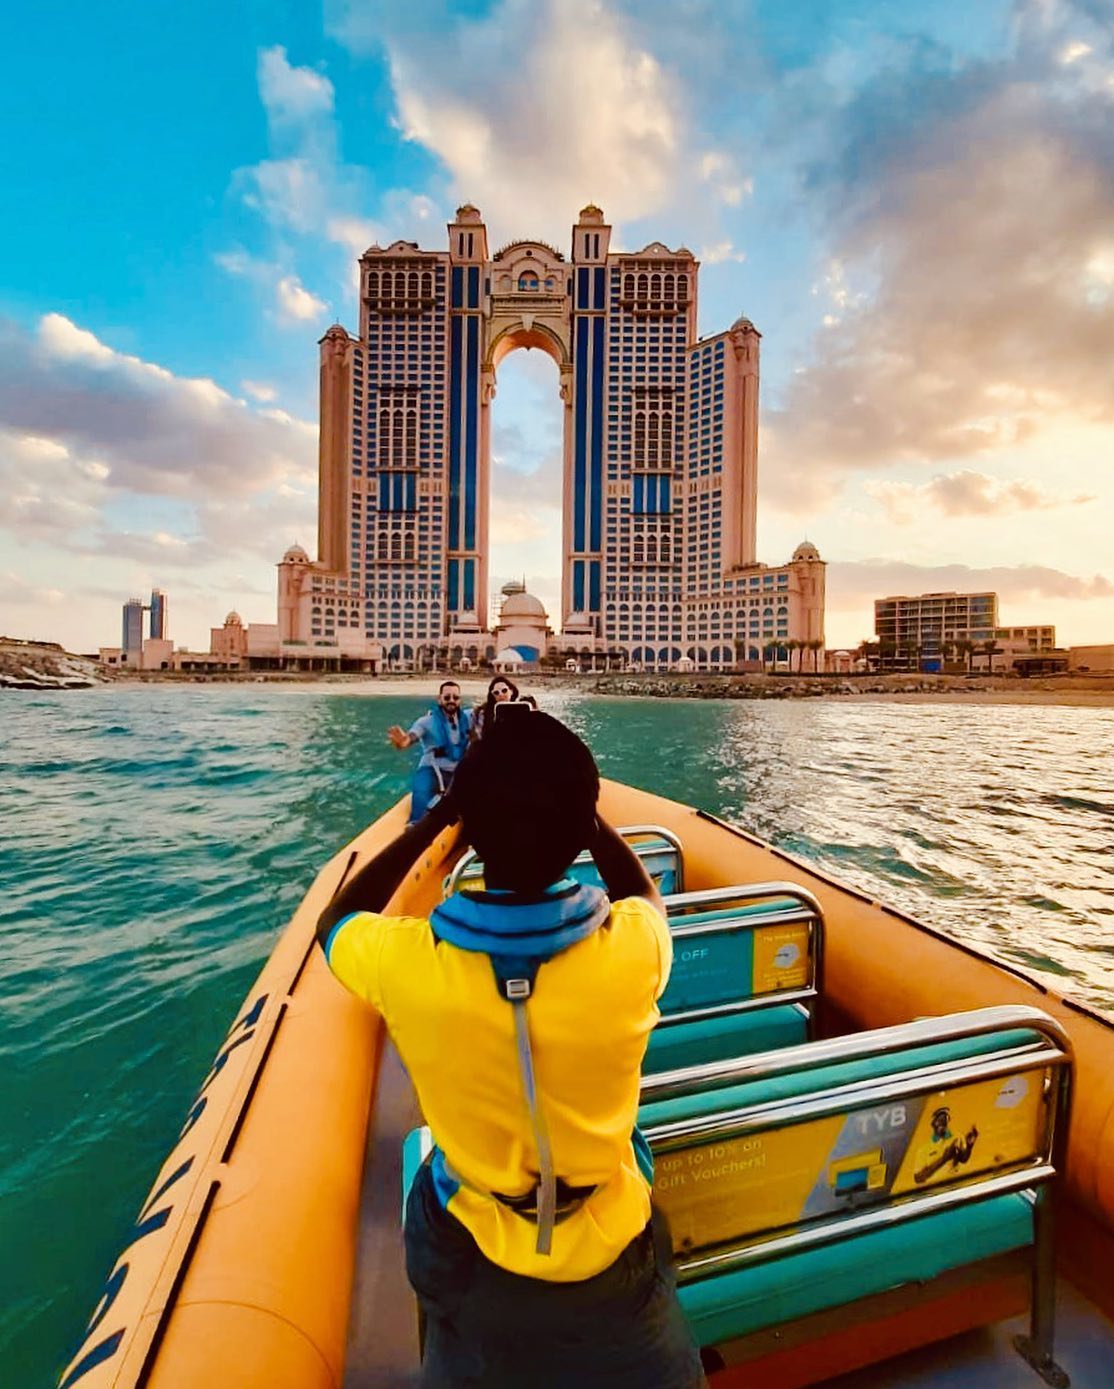 Admire the attractions from a boat in Dubai